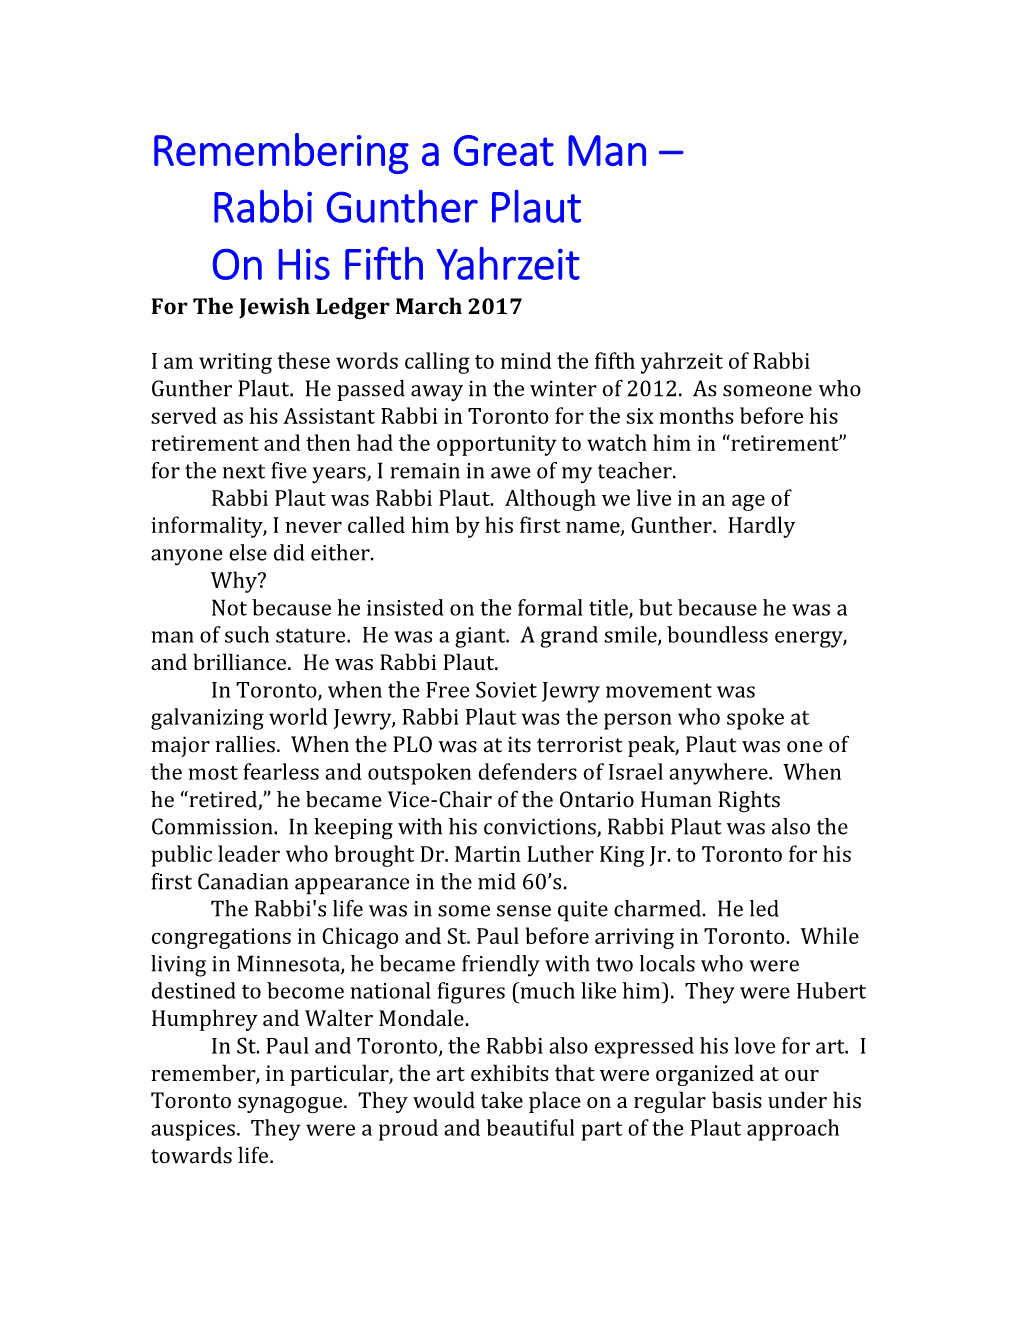 Remembering a Great Man – Rabbi Gunther Plaut on His Fifth Yahrzeit for the Jewish Ledger March 2017